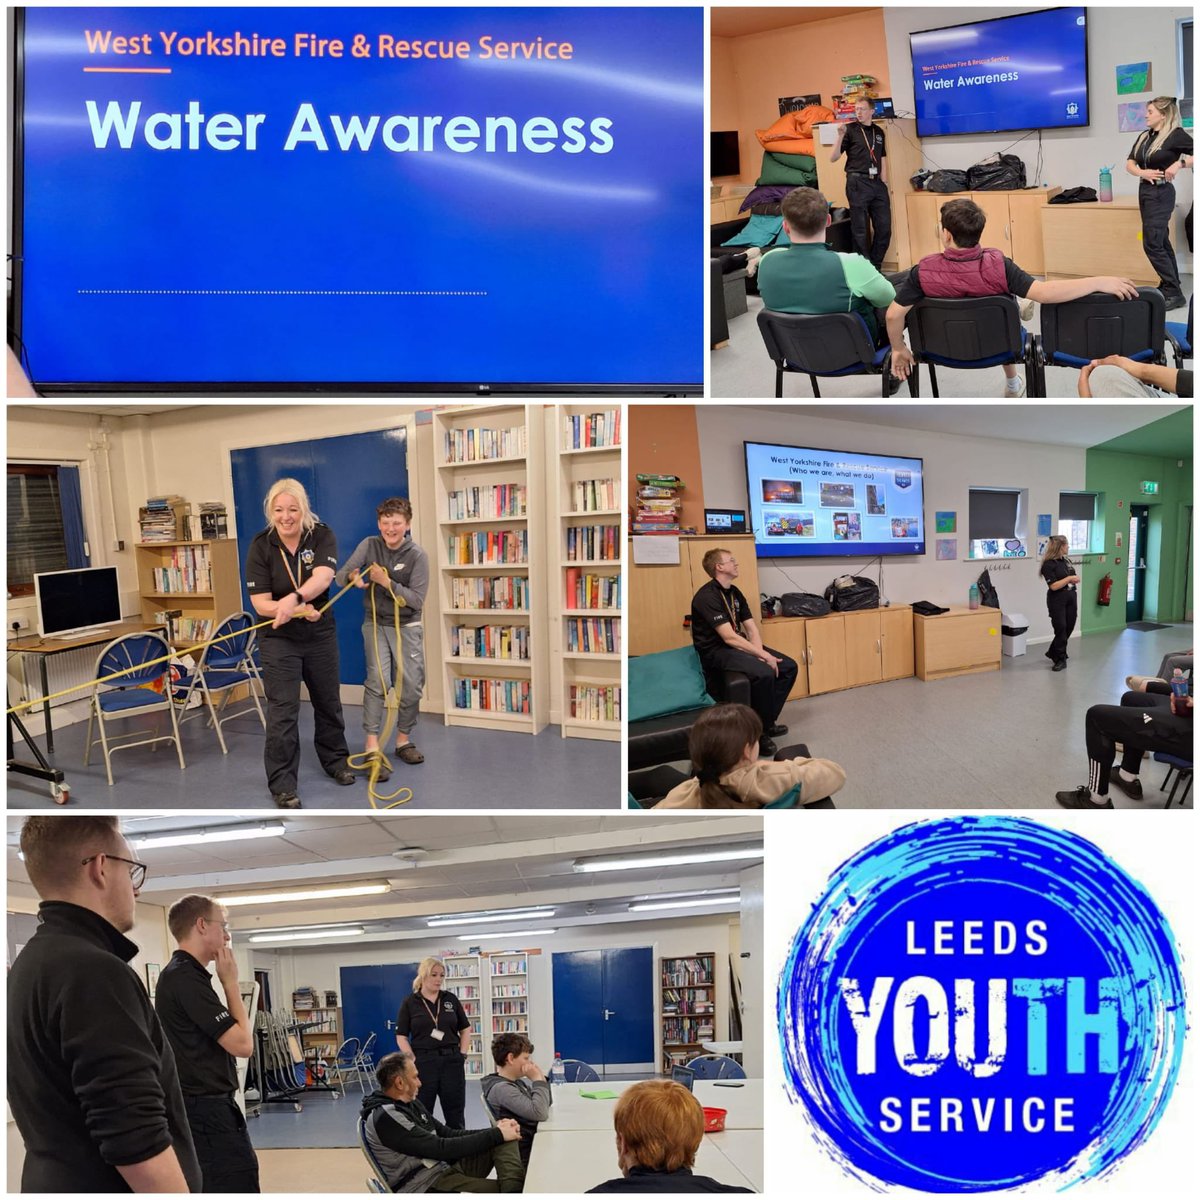 #Thankyou to @WYFRS for some fantastic informative sessions this week. #Youngpeople engaged in a number of sessions focused on #water #awareness & #safety #Youthwork #LeedsYouthService